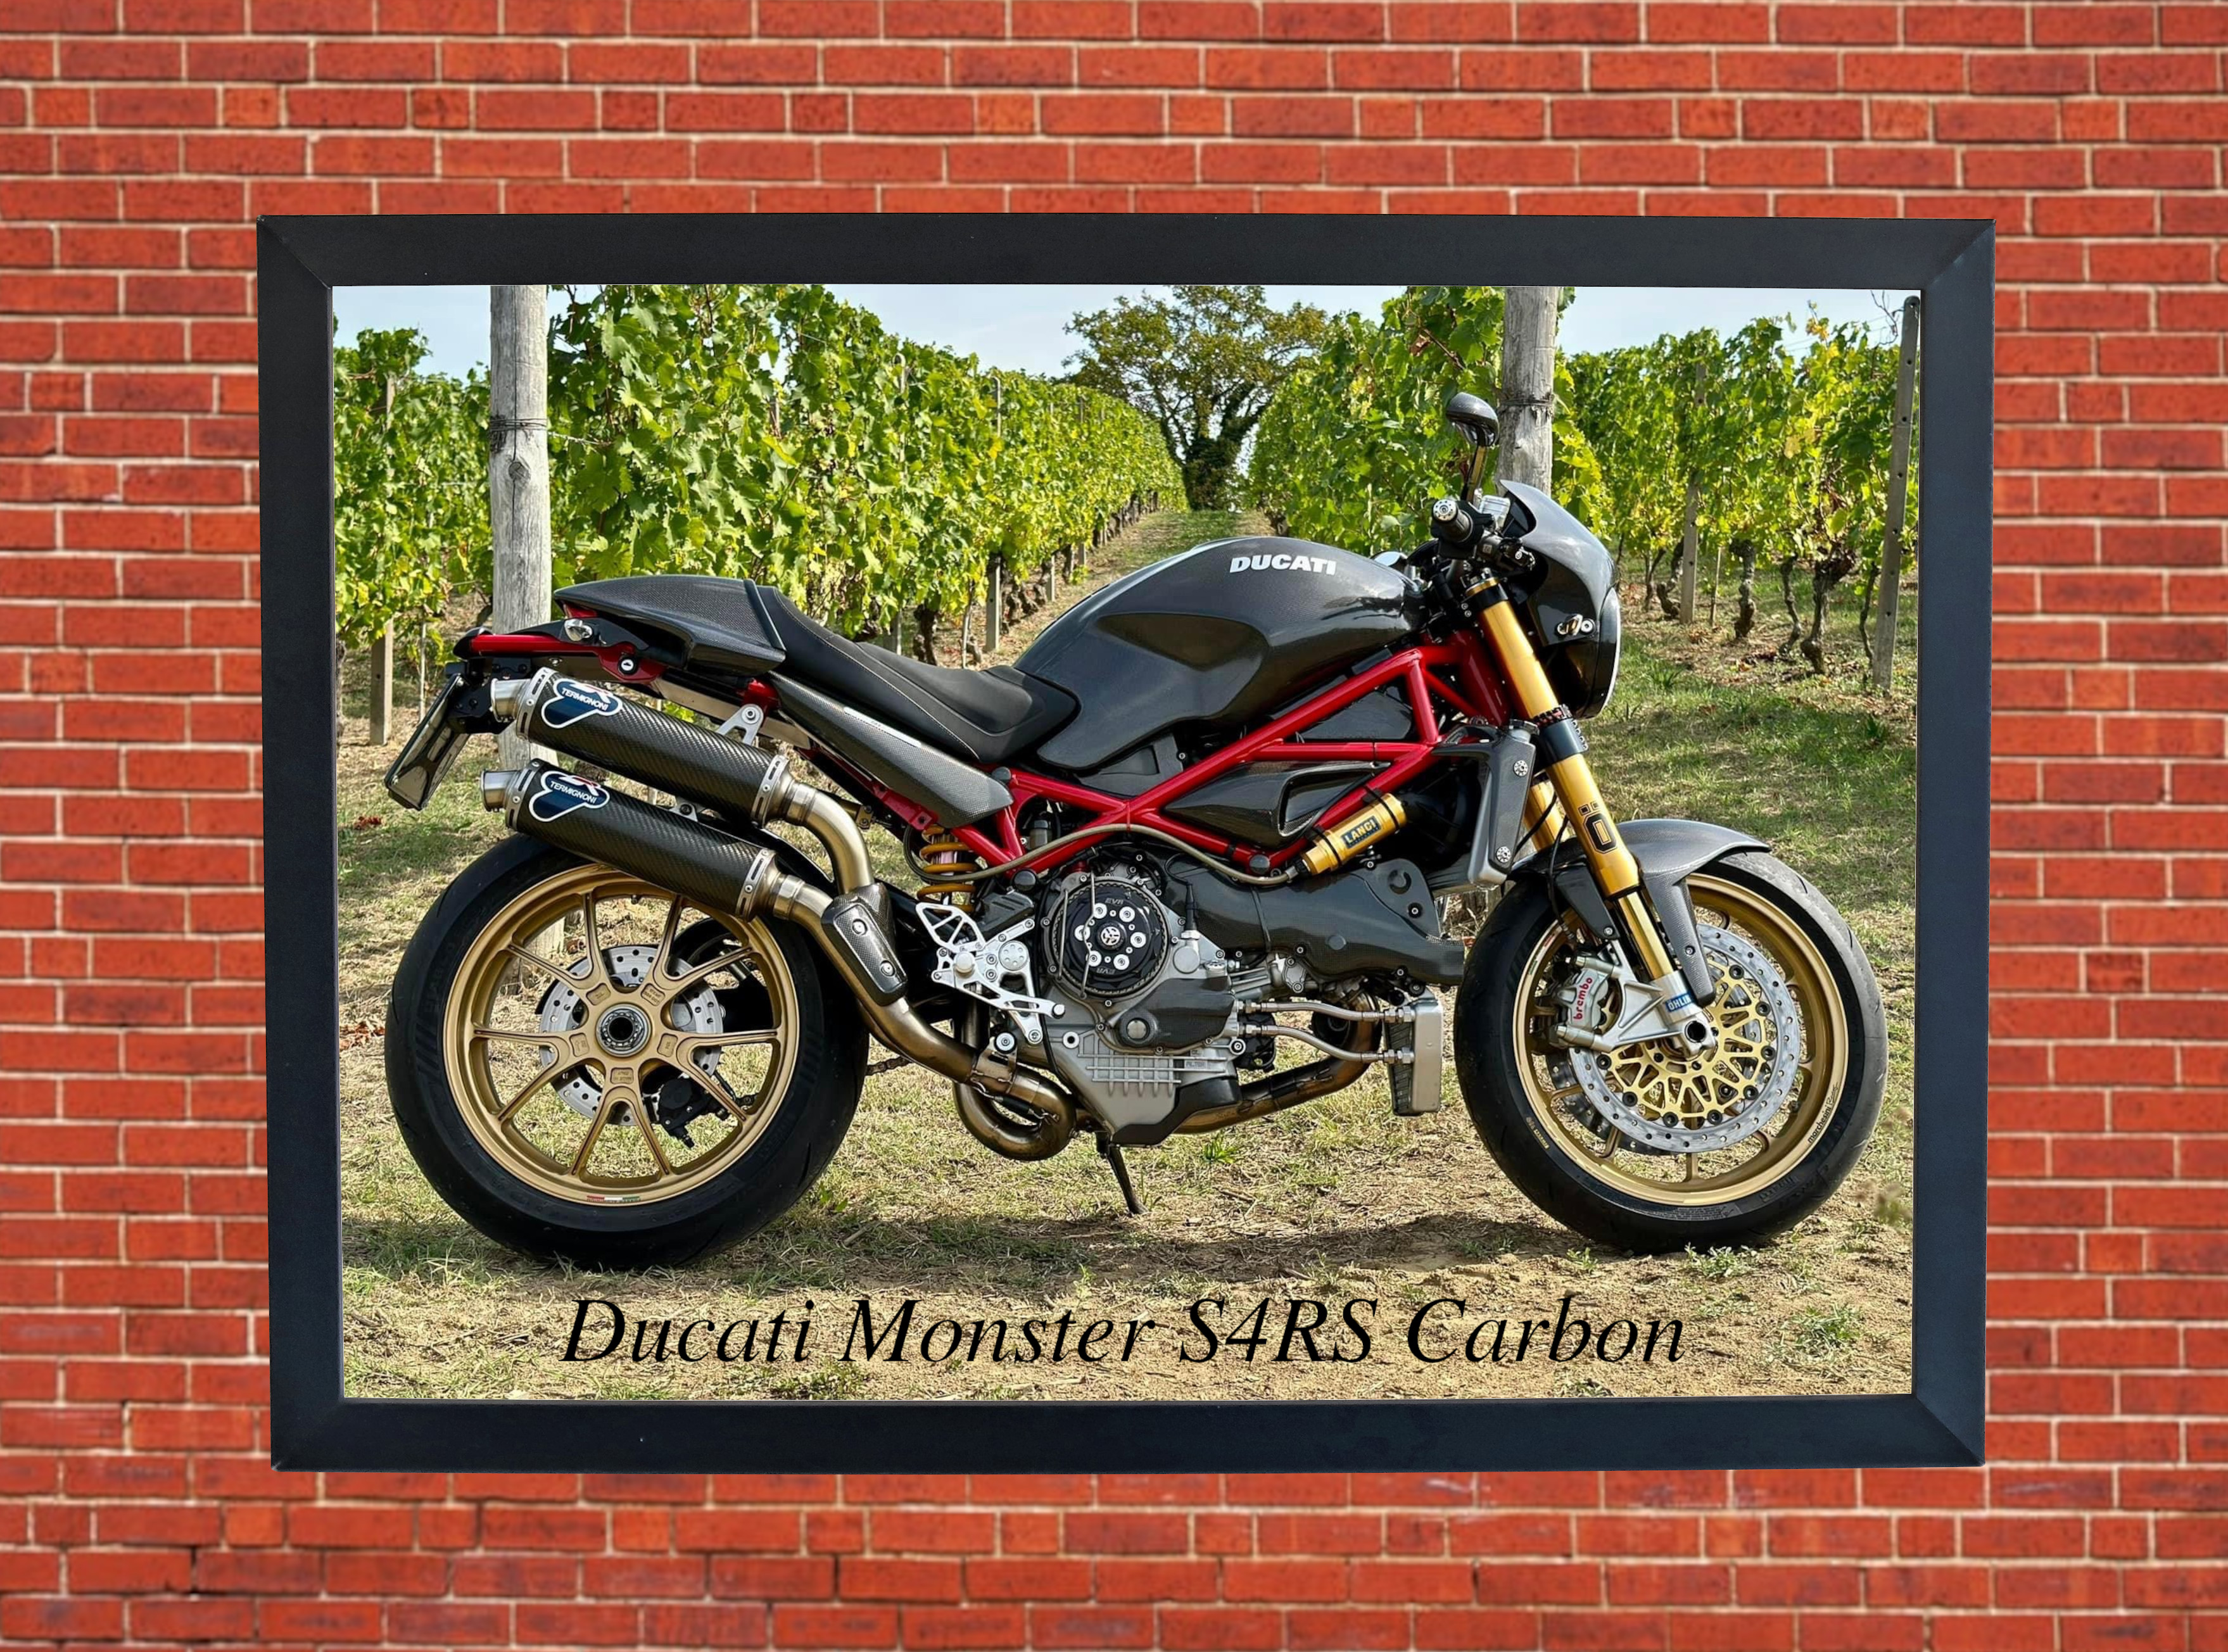 Ducati Monster S4RS Carbon Motorbike Motorcycle A3/A4 Size Print Poster Photographic Paper Wall Art